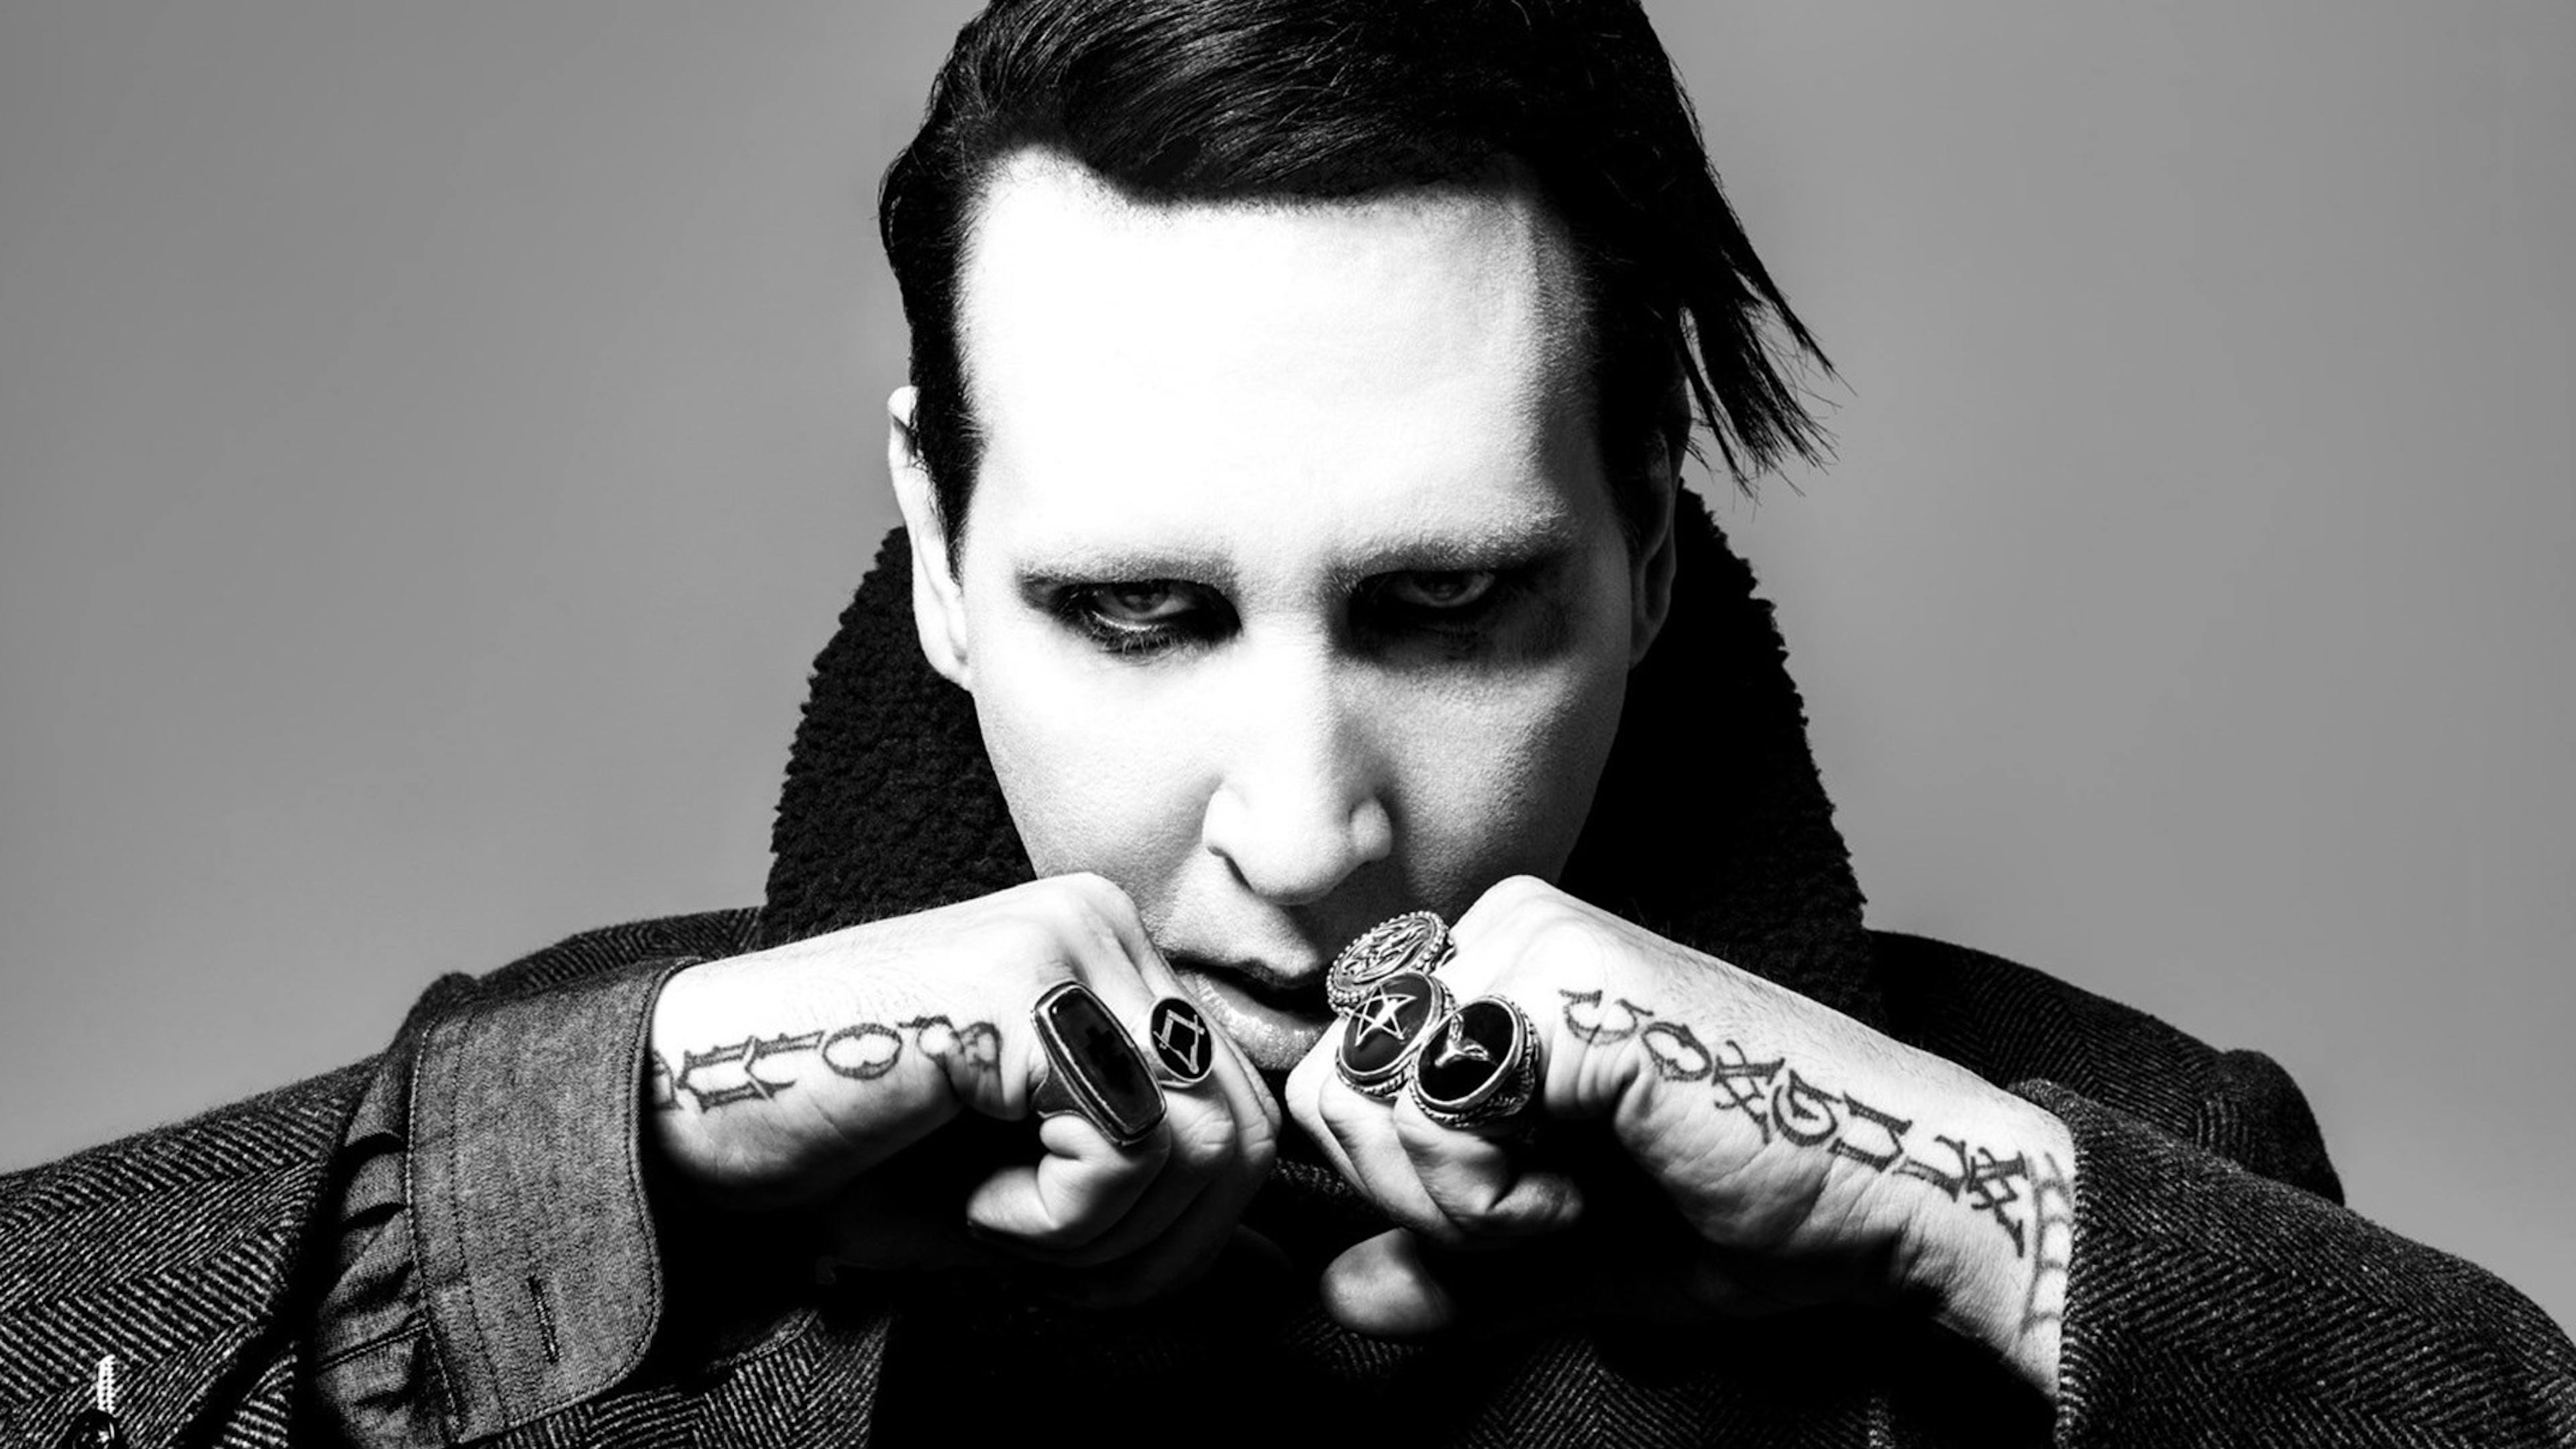 6 Things We Want From The New Marilyn Manson Album